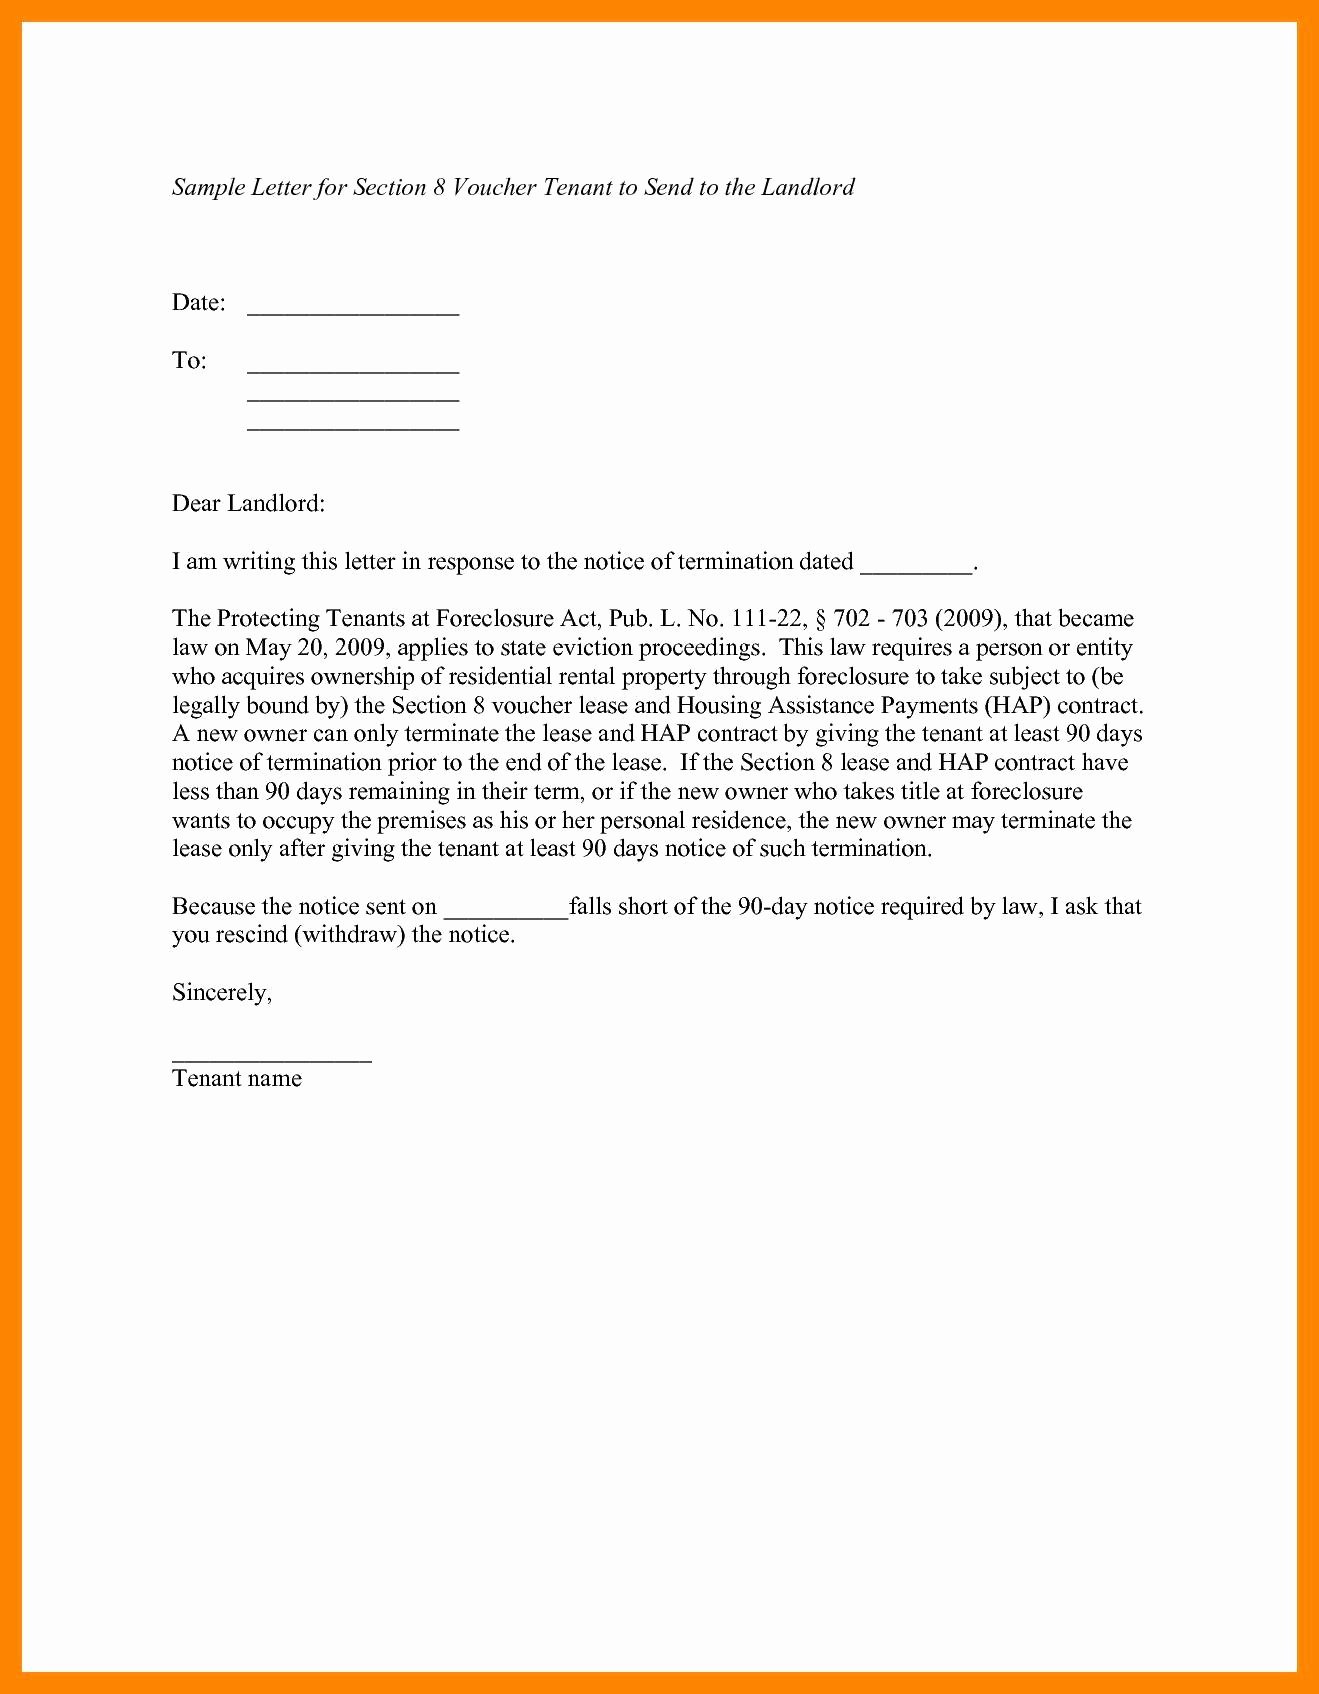 Sample Landlord Letters to Tenants Elegant Landlord Notice Letter to Tenant Template Examples